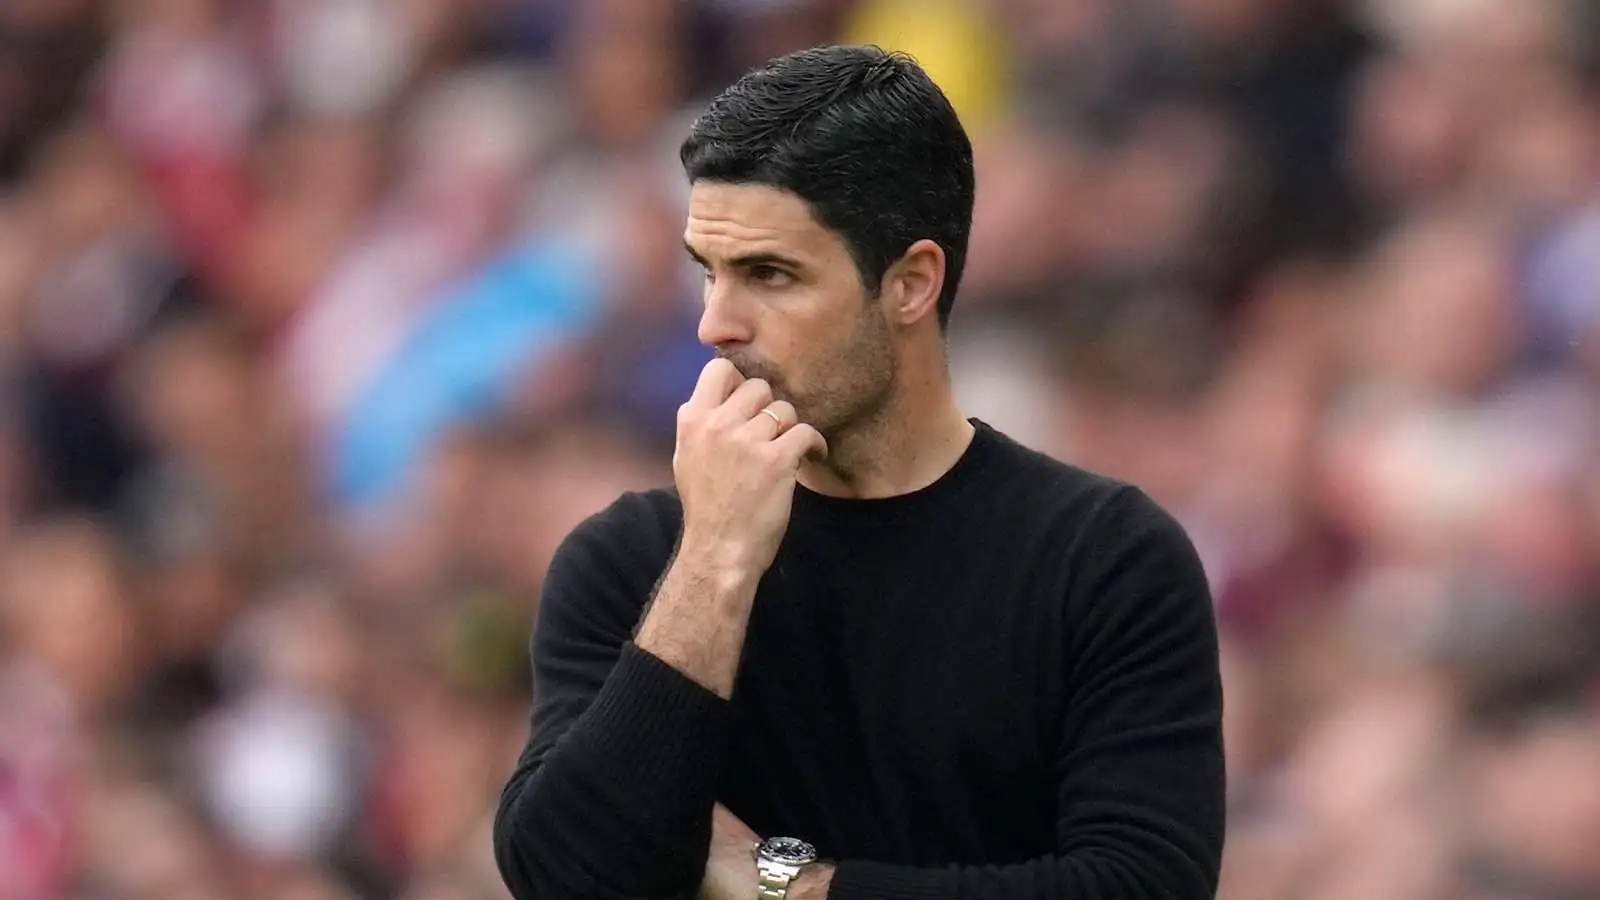 Arsenal's manager Mikel Arteta reacts after Brighton's Julio Enciso scored his side's opening goal during the English Premier League soccer match between Arsenal and Brighton and Hove Albion at Emirates stadium in London, Sunday, May 14, 2023